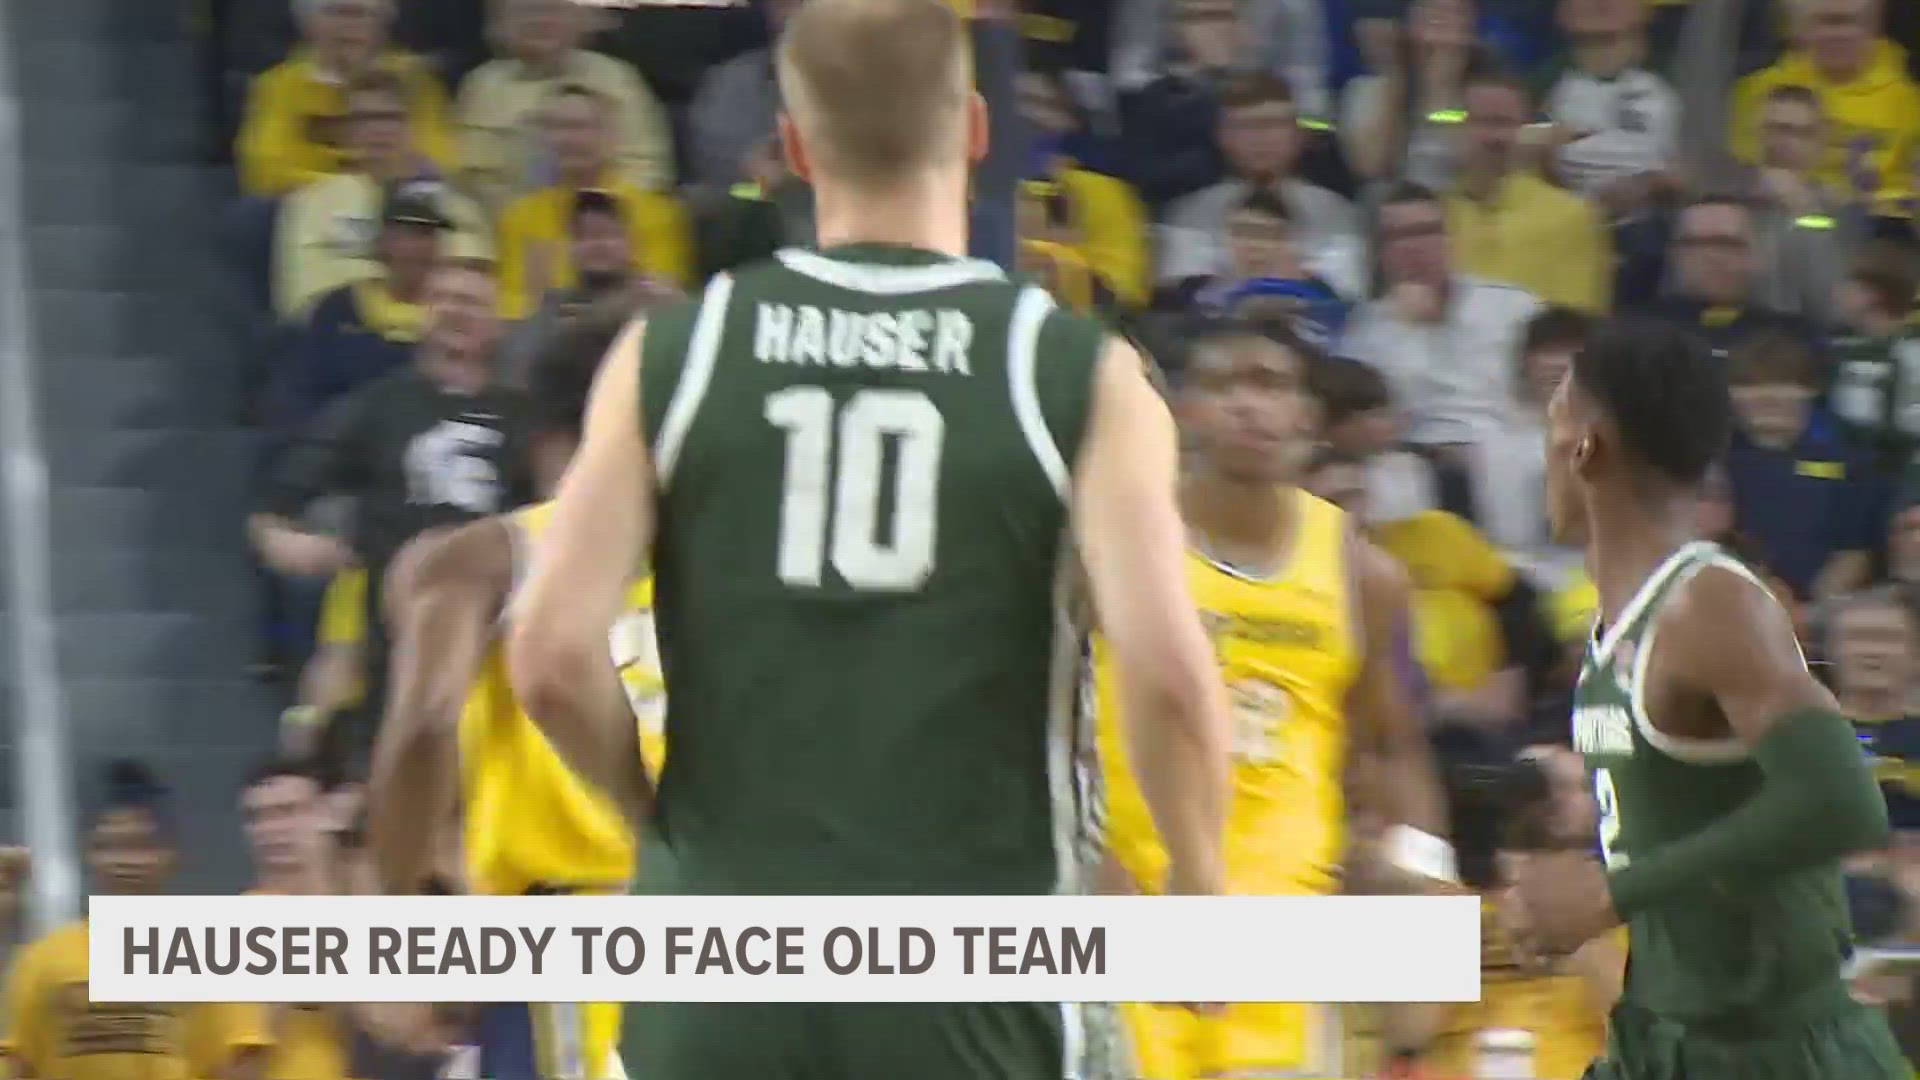 MSU's Joey Hauser prepares to face old team in NCAA Tournament